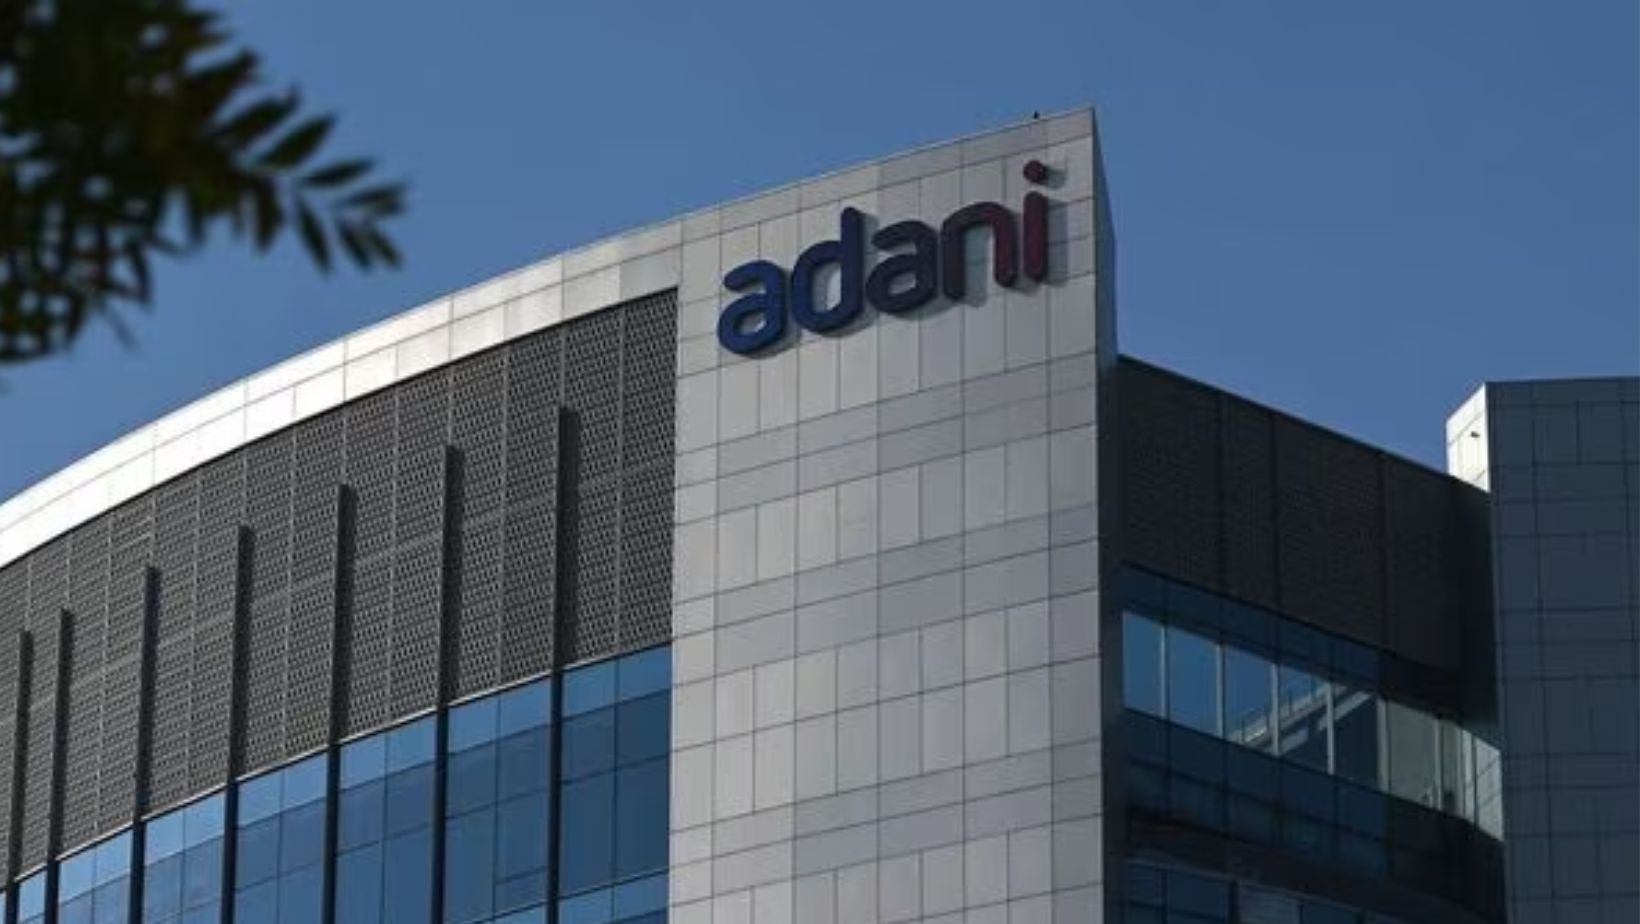 Adani Hiring Assistant Manager Job Role Apply Right Now